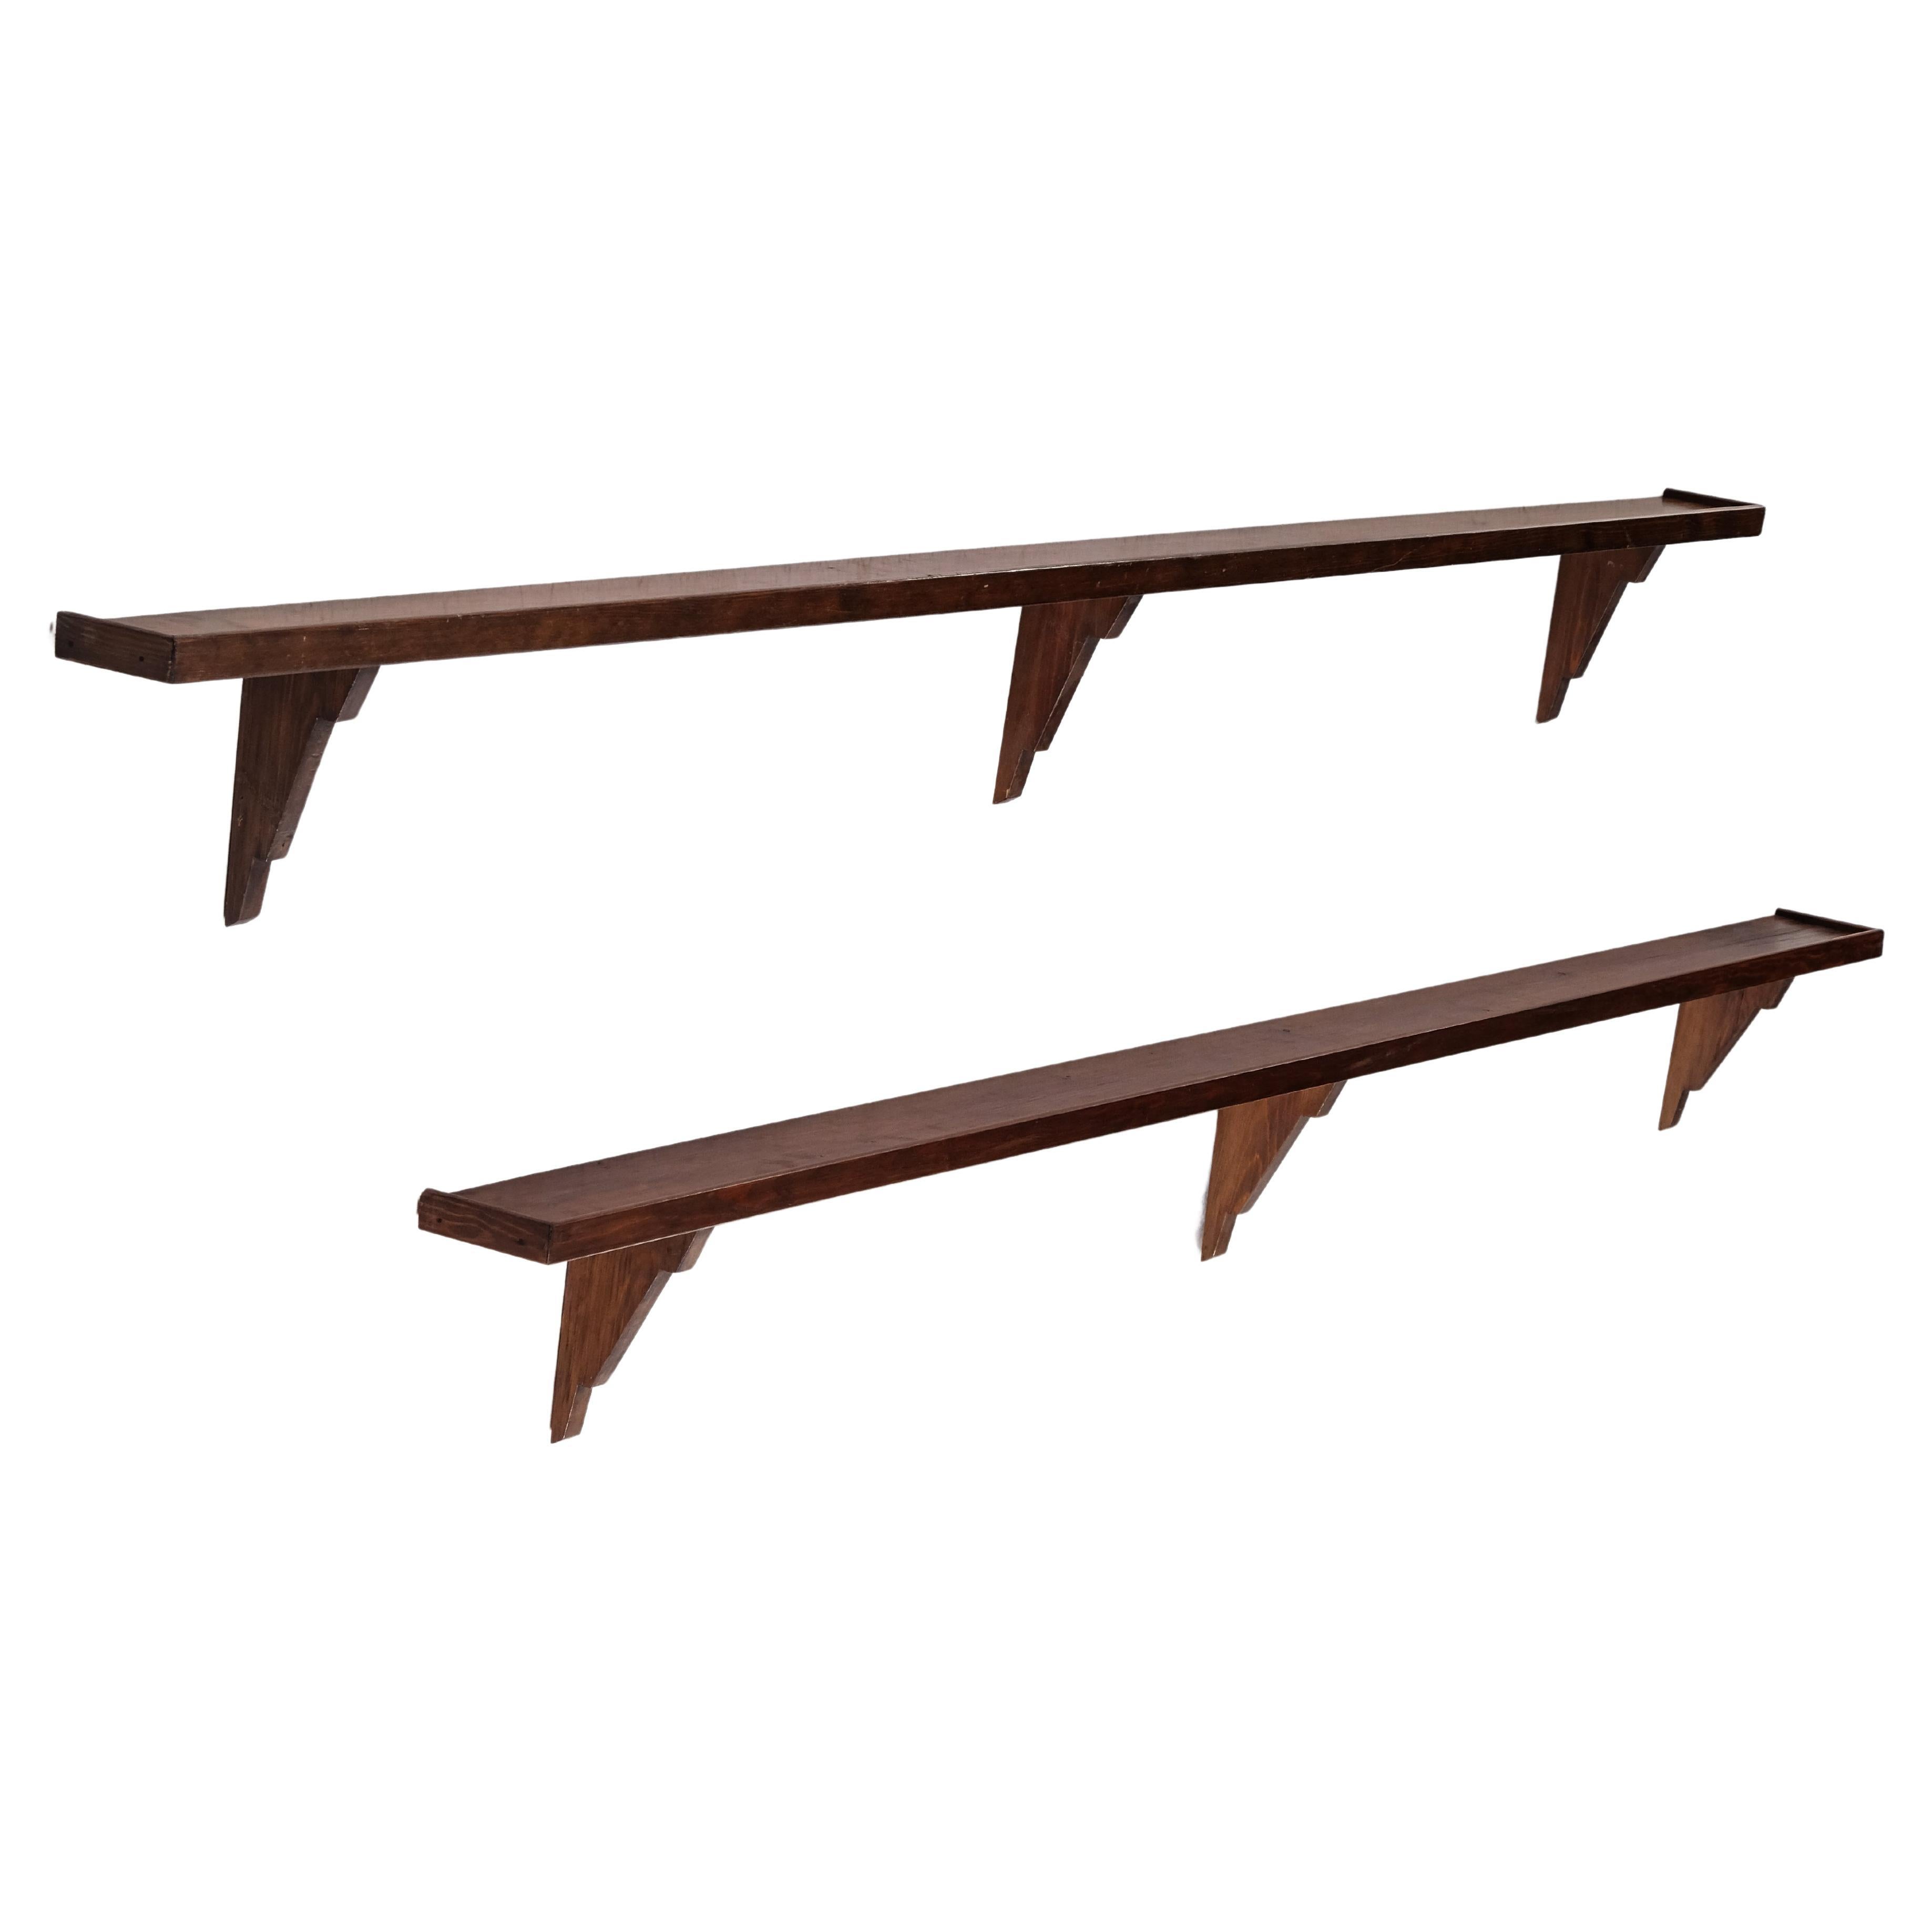 Rare pair of pine wall shelves, Sweden, 1930s For Sale 2